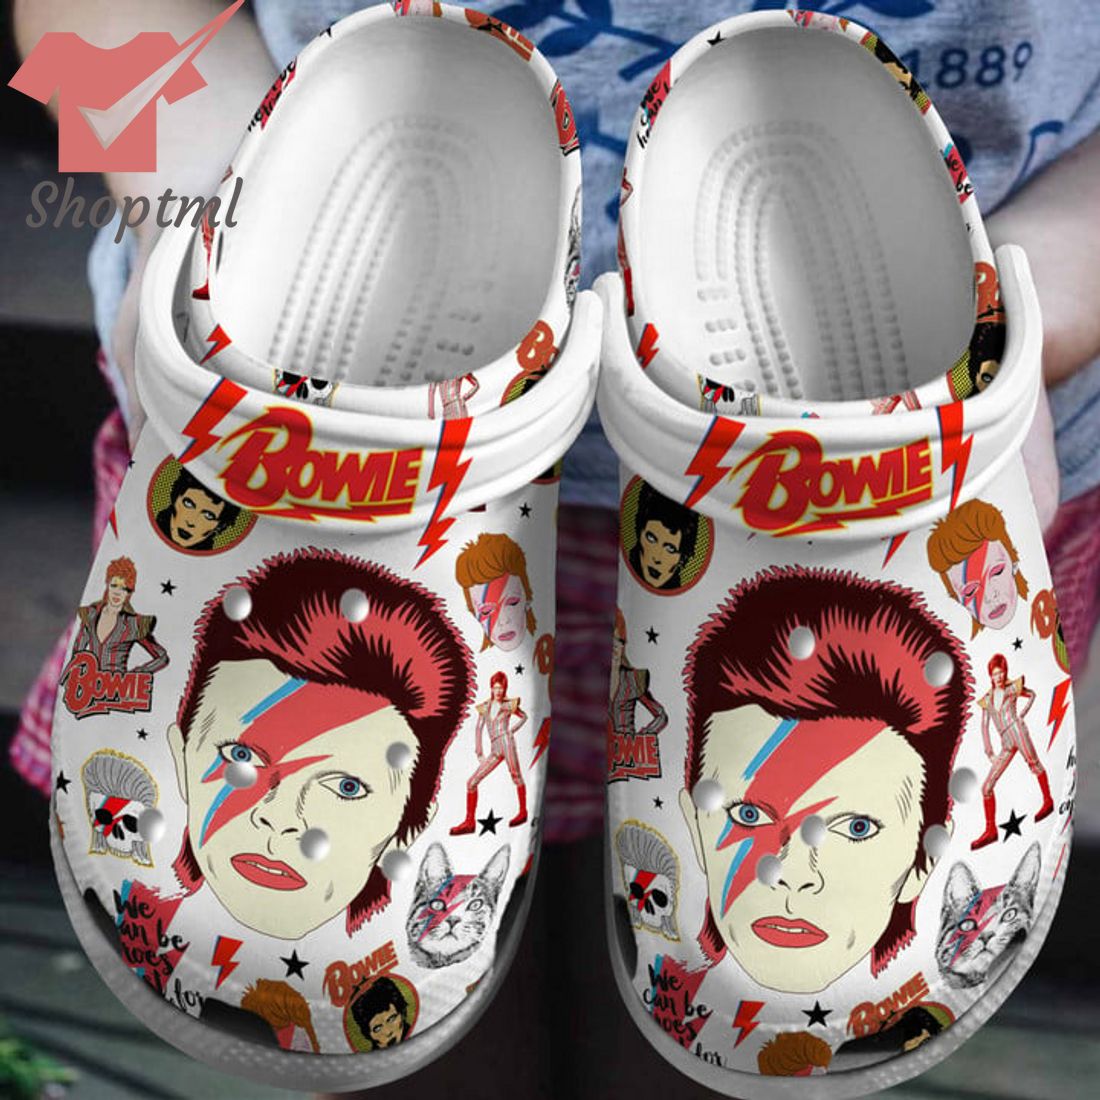 David Bowie We Can Be Heroes Crocs Clog Shoes